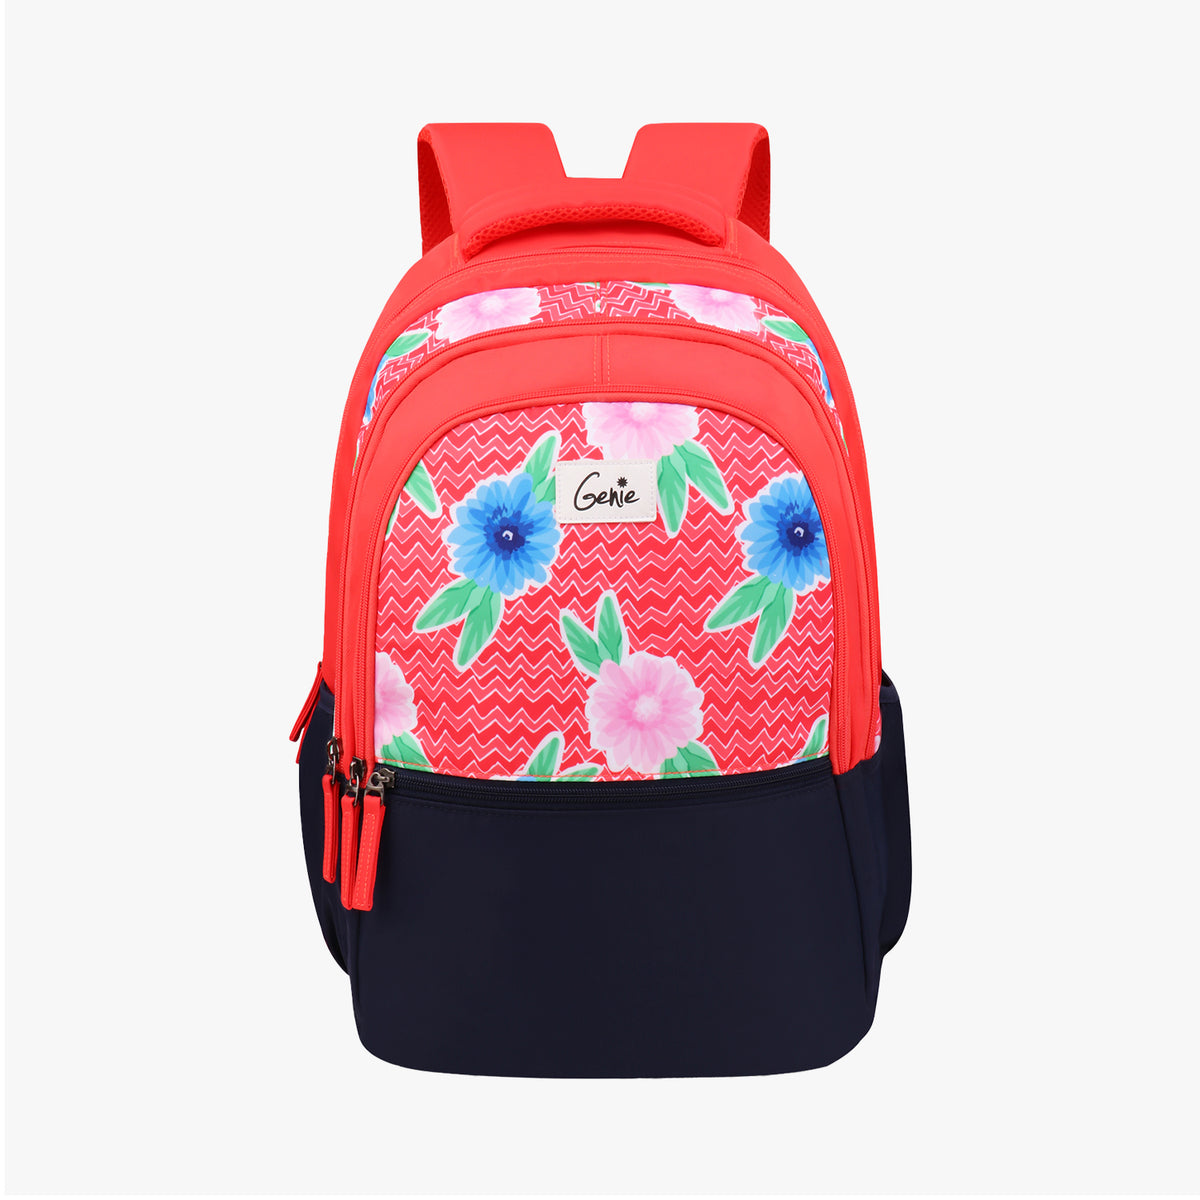 ORGANLY Latest And Trendy Stylish Waterproof College/Casual/School Bag/ Backpack For Kids, Boys, Girls, Men And Women (Pack of 1) (cute pink) :  Amazon.in: Fashion